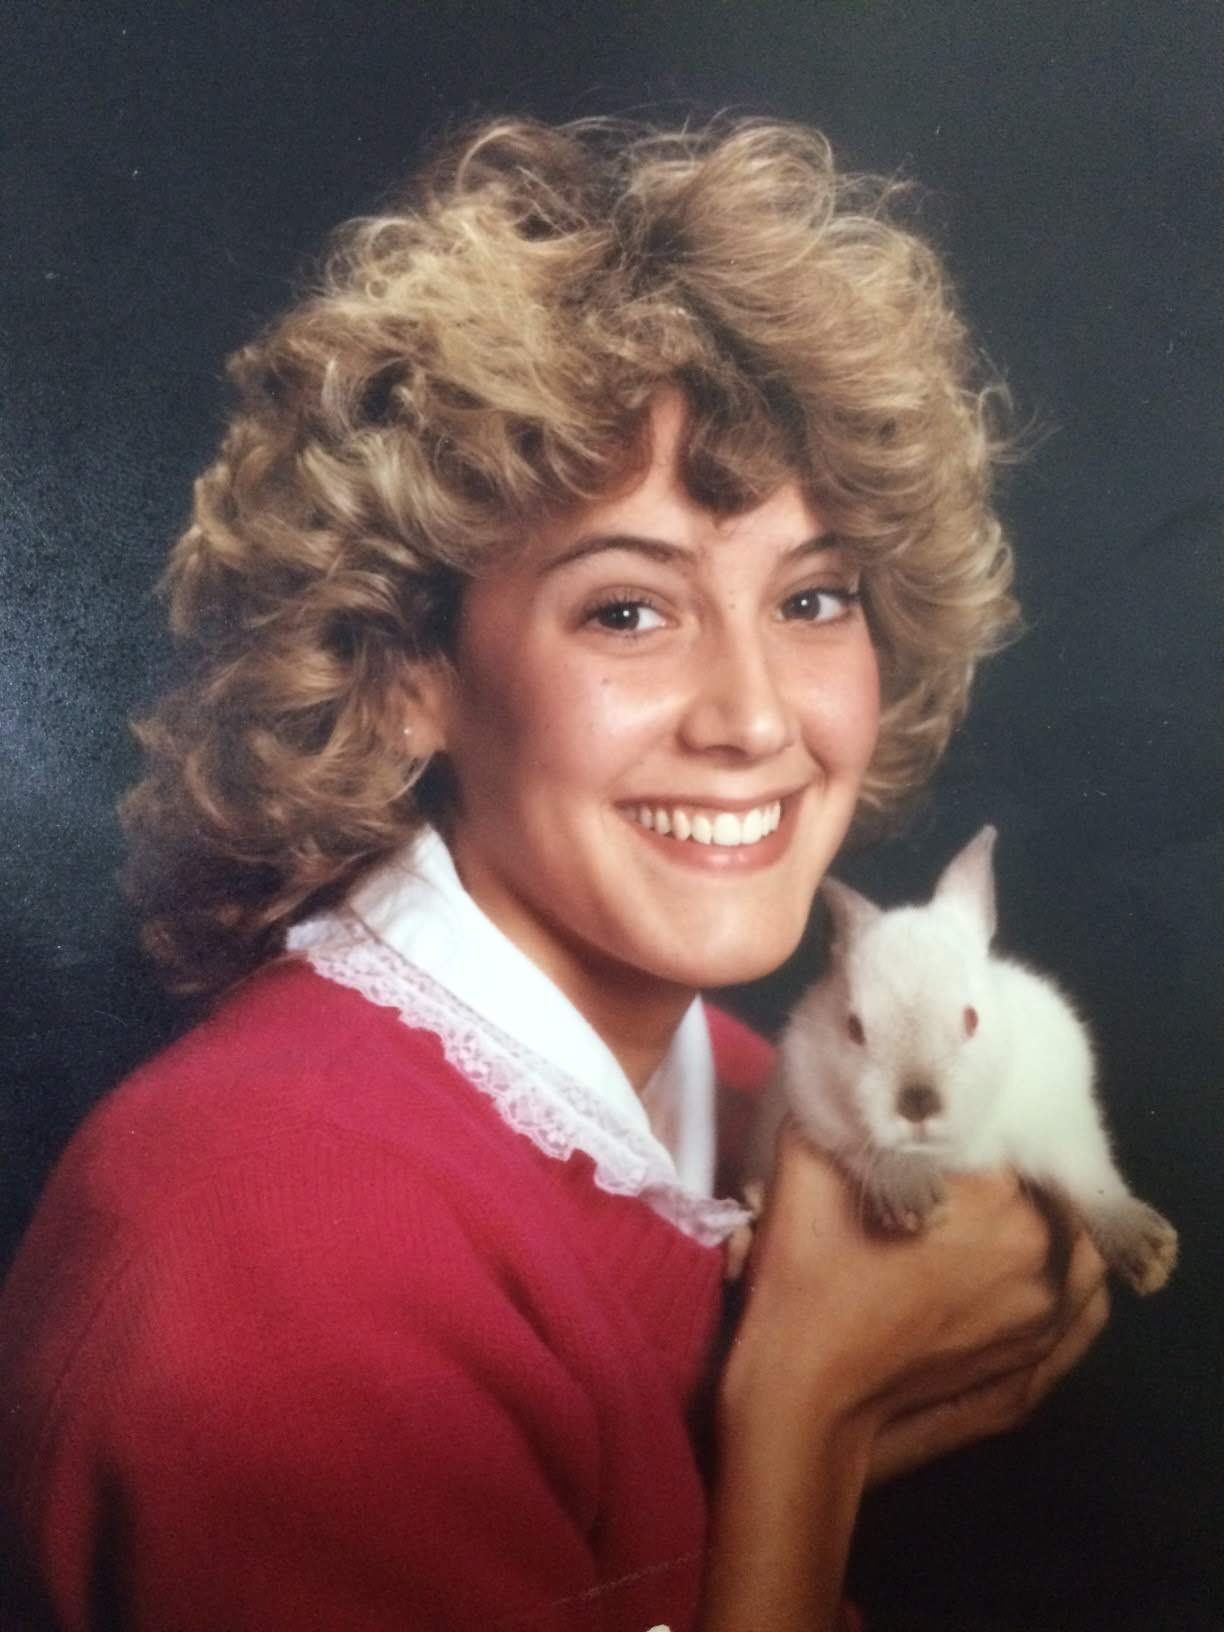 A picture of Sue a woman with curly blonde hair and brown eyes holding a rabbit